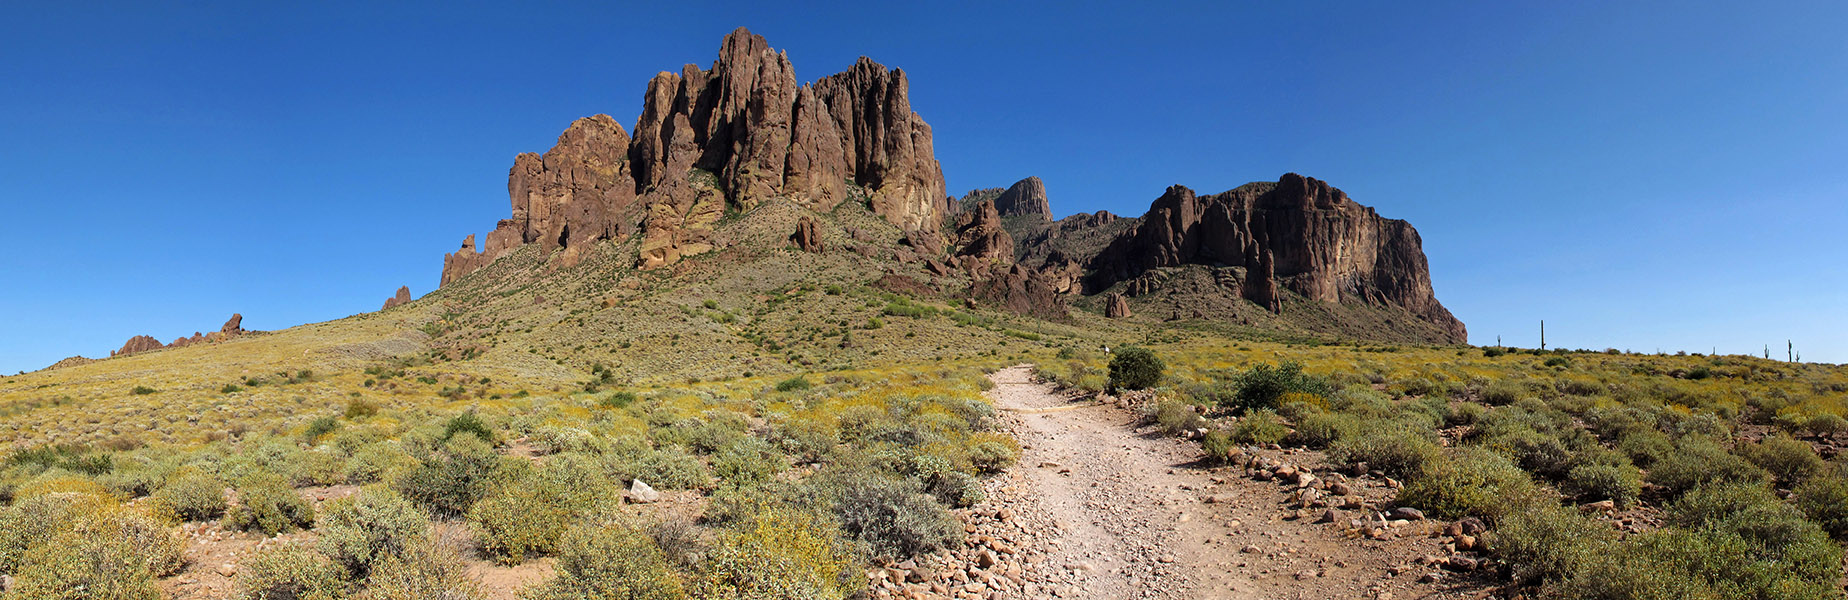 Superstition Mountain afternoon panorama [Siphon Draw Trail, Tonto National Forest, Pinal County, Arizona]